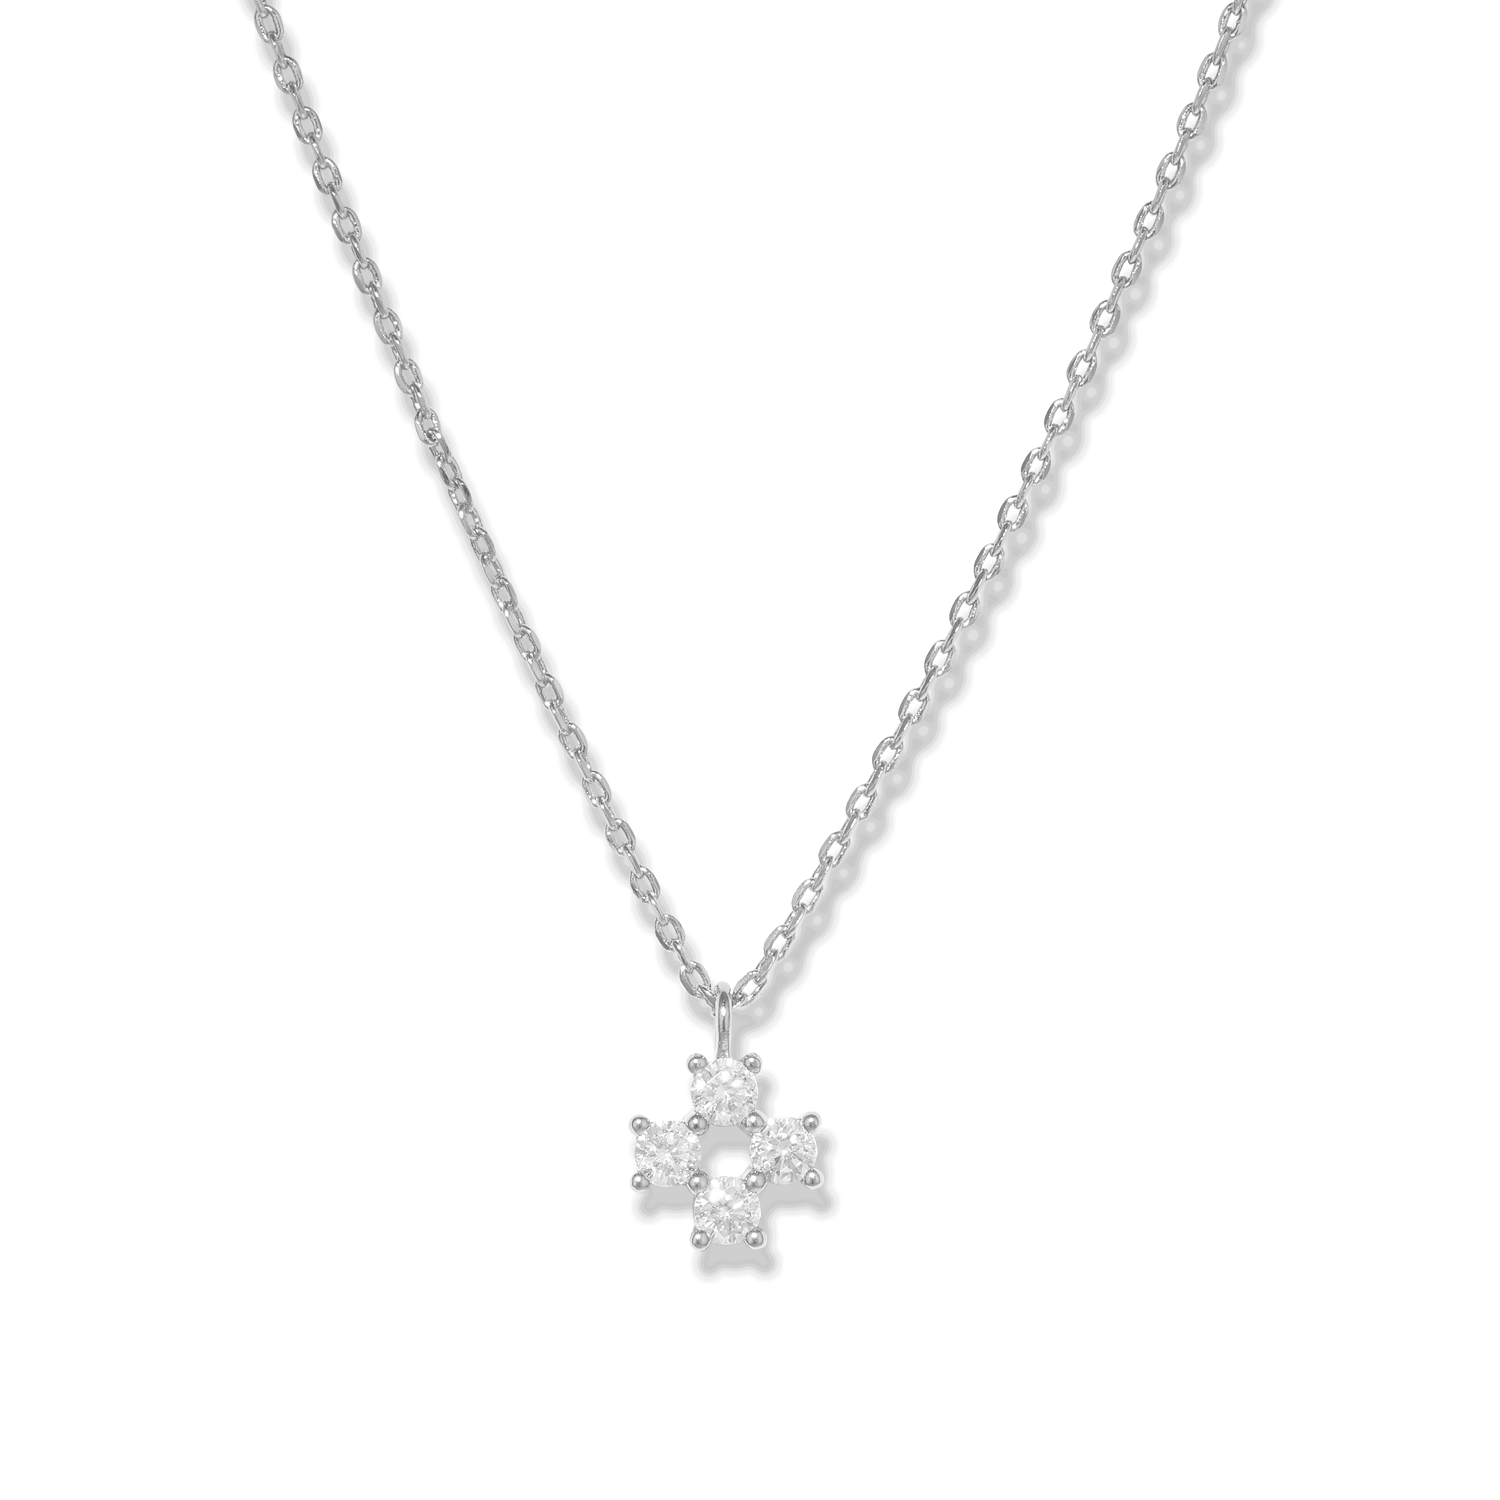 Elegant and dainty necklace in 925 silver with cubic zirconia